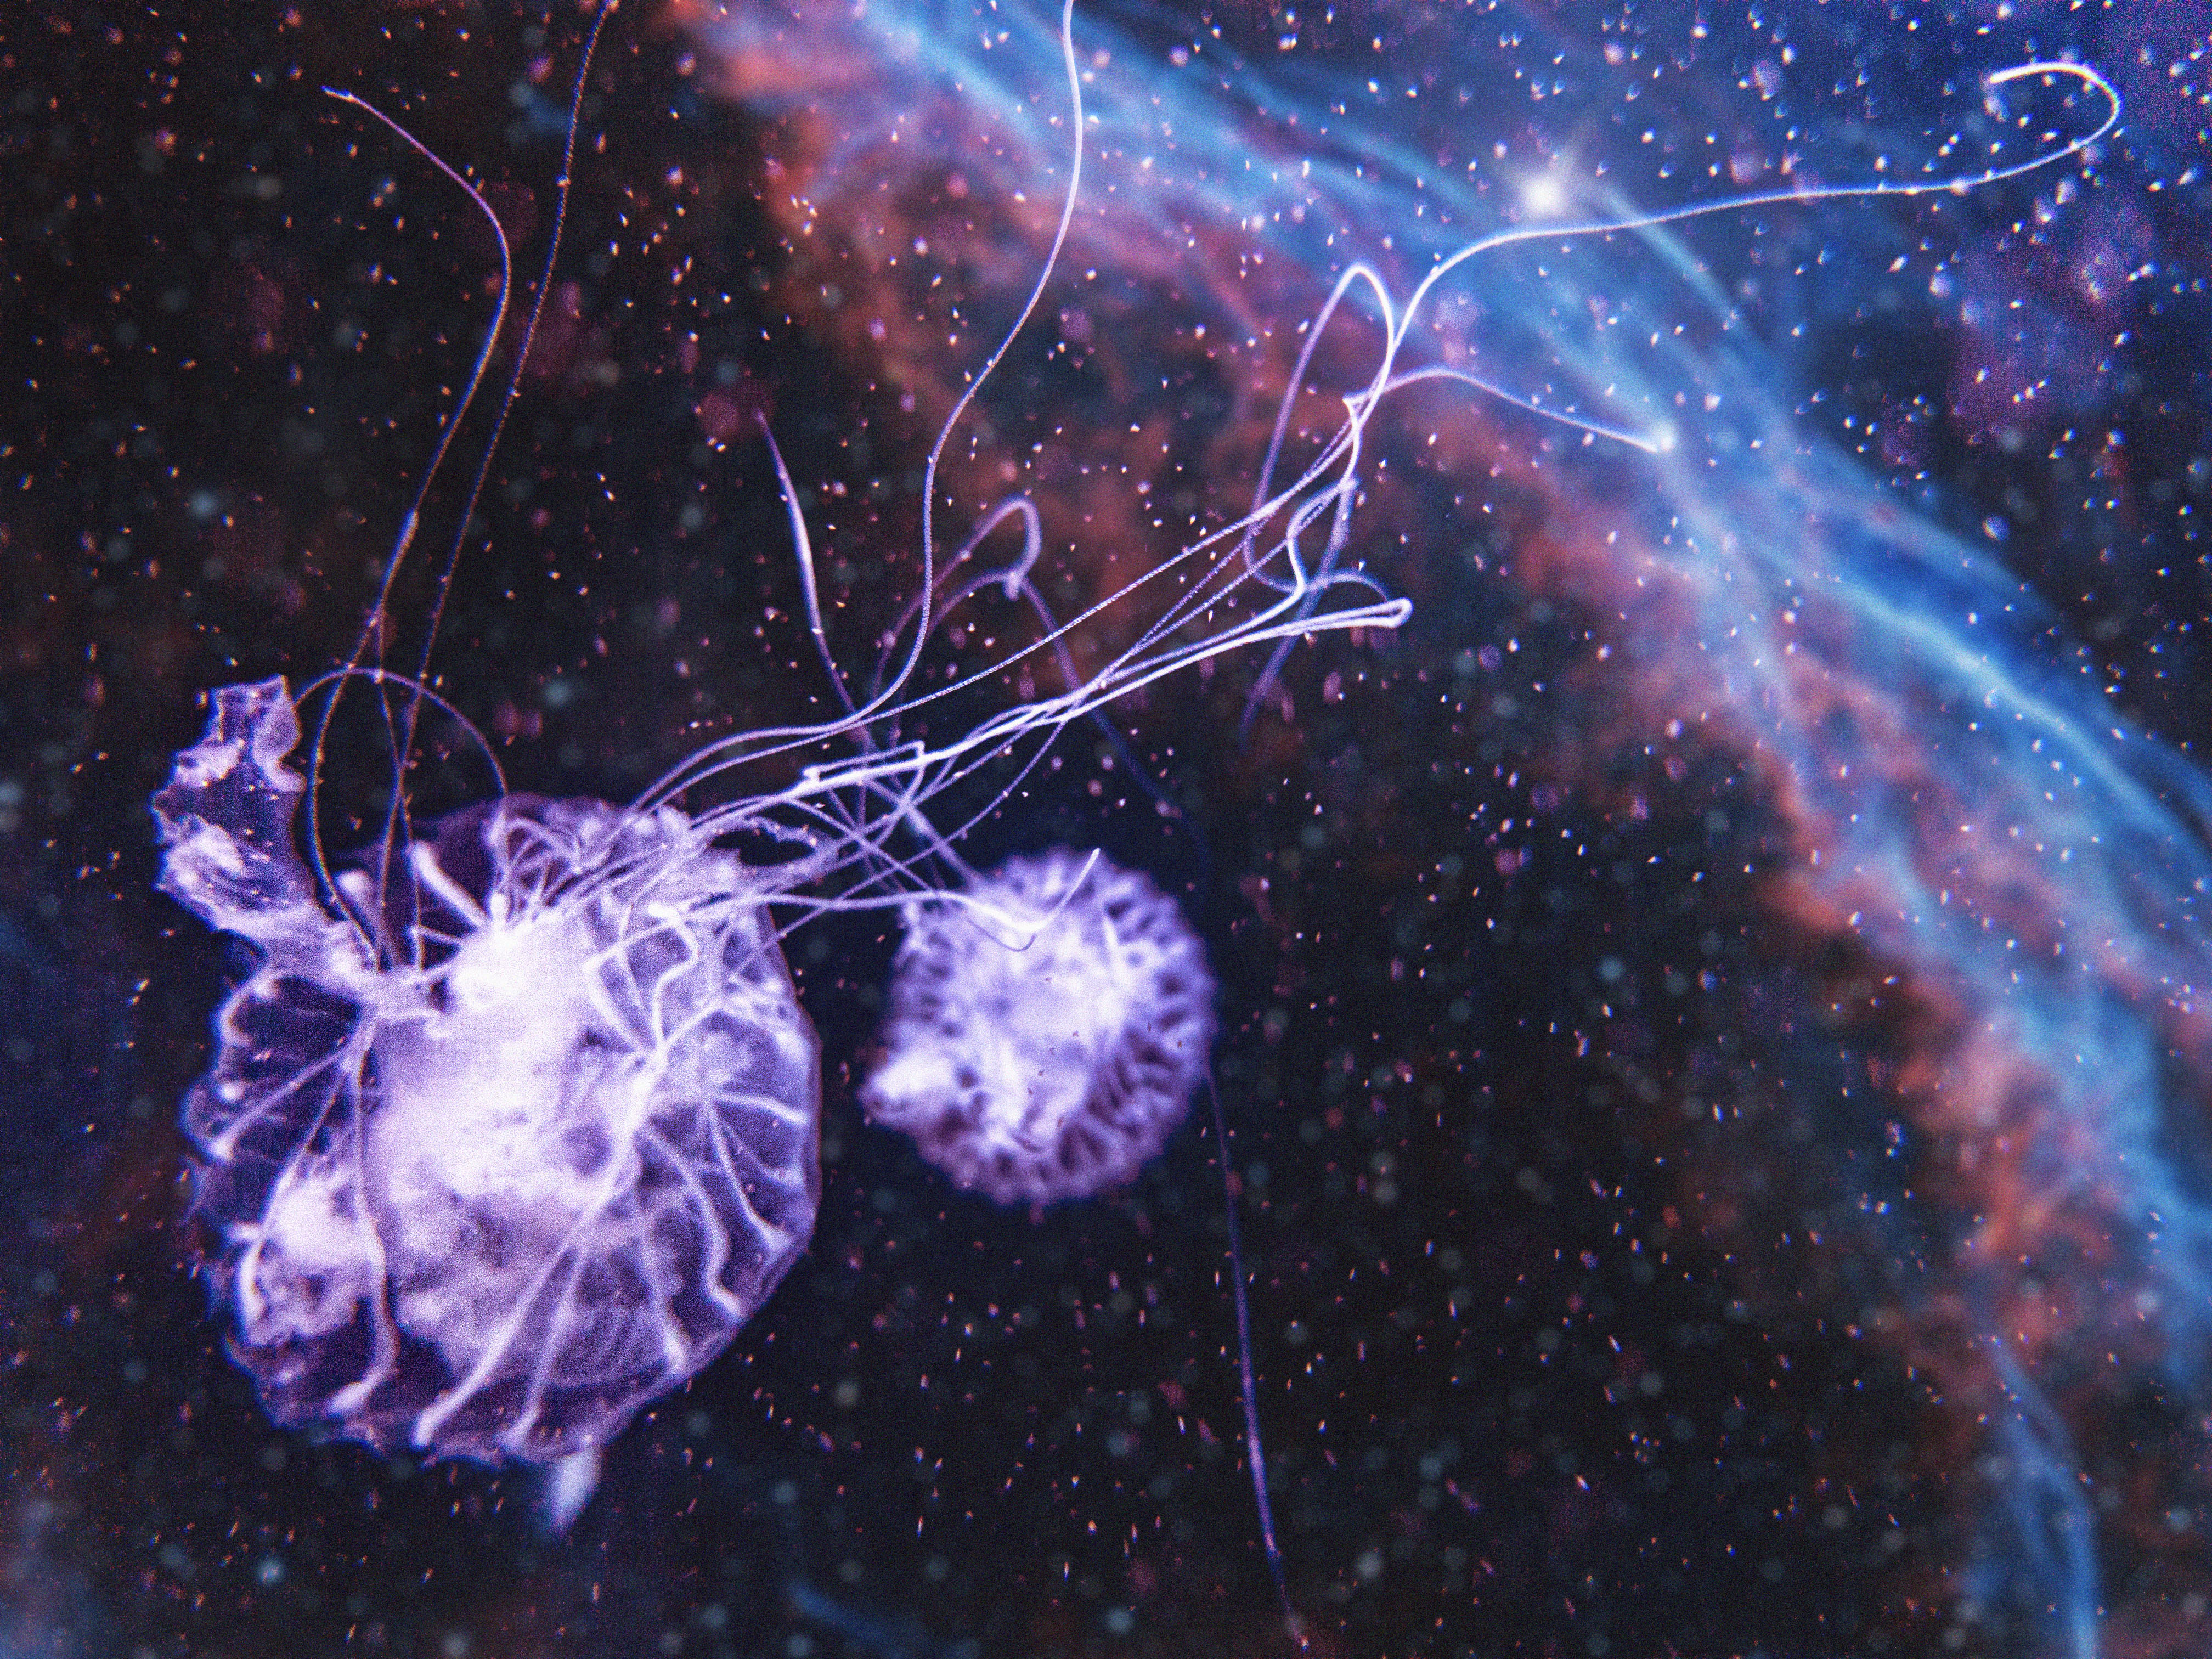 2nd Angle of These Mystical Jellies | v1